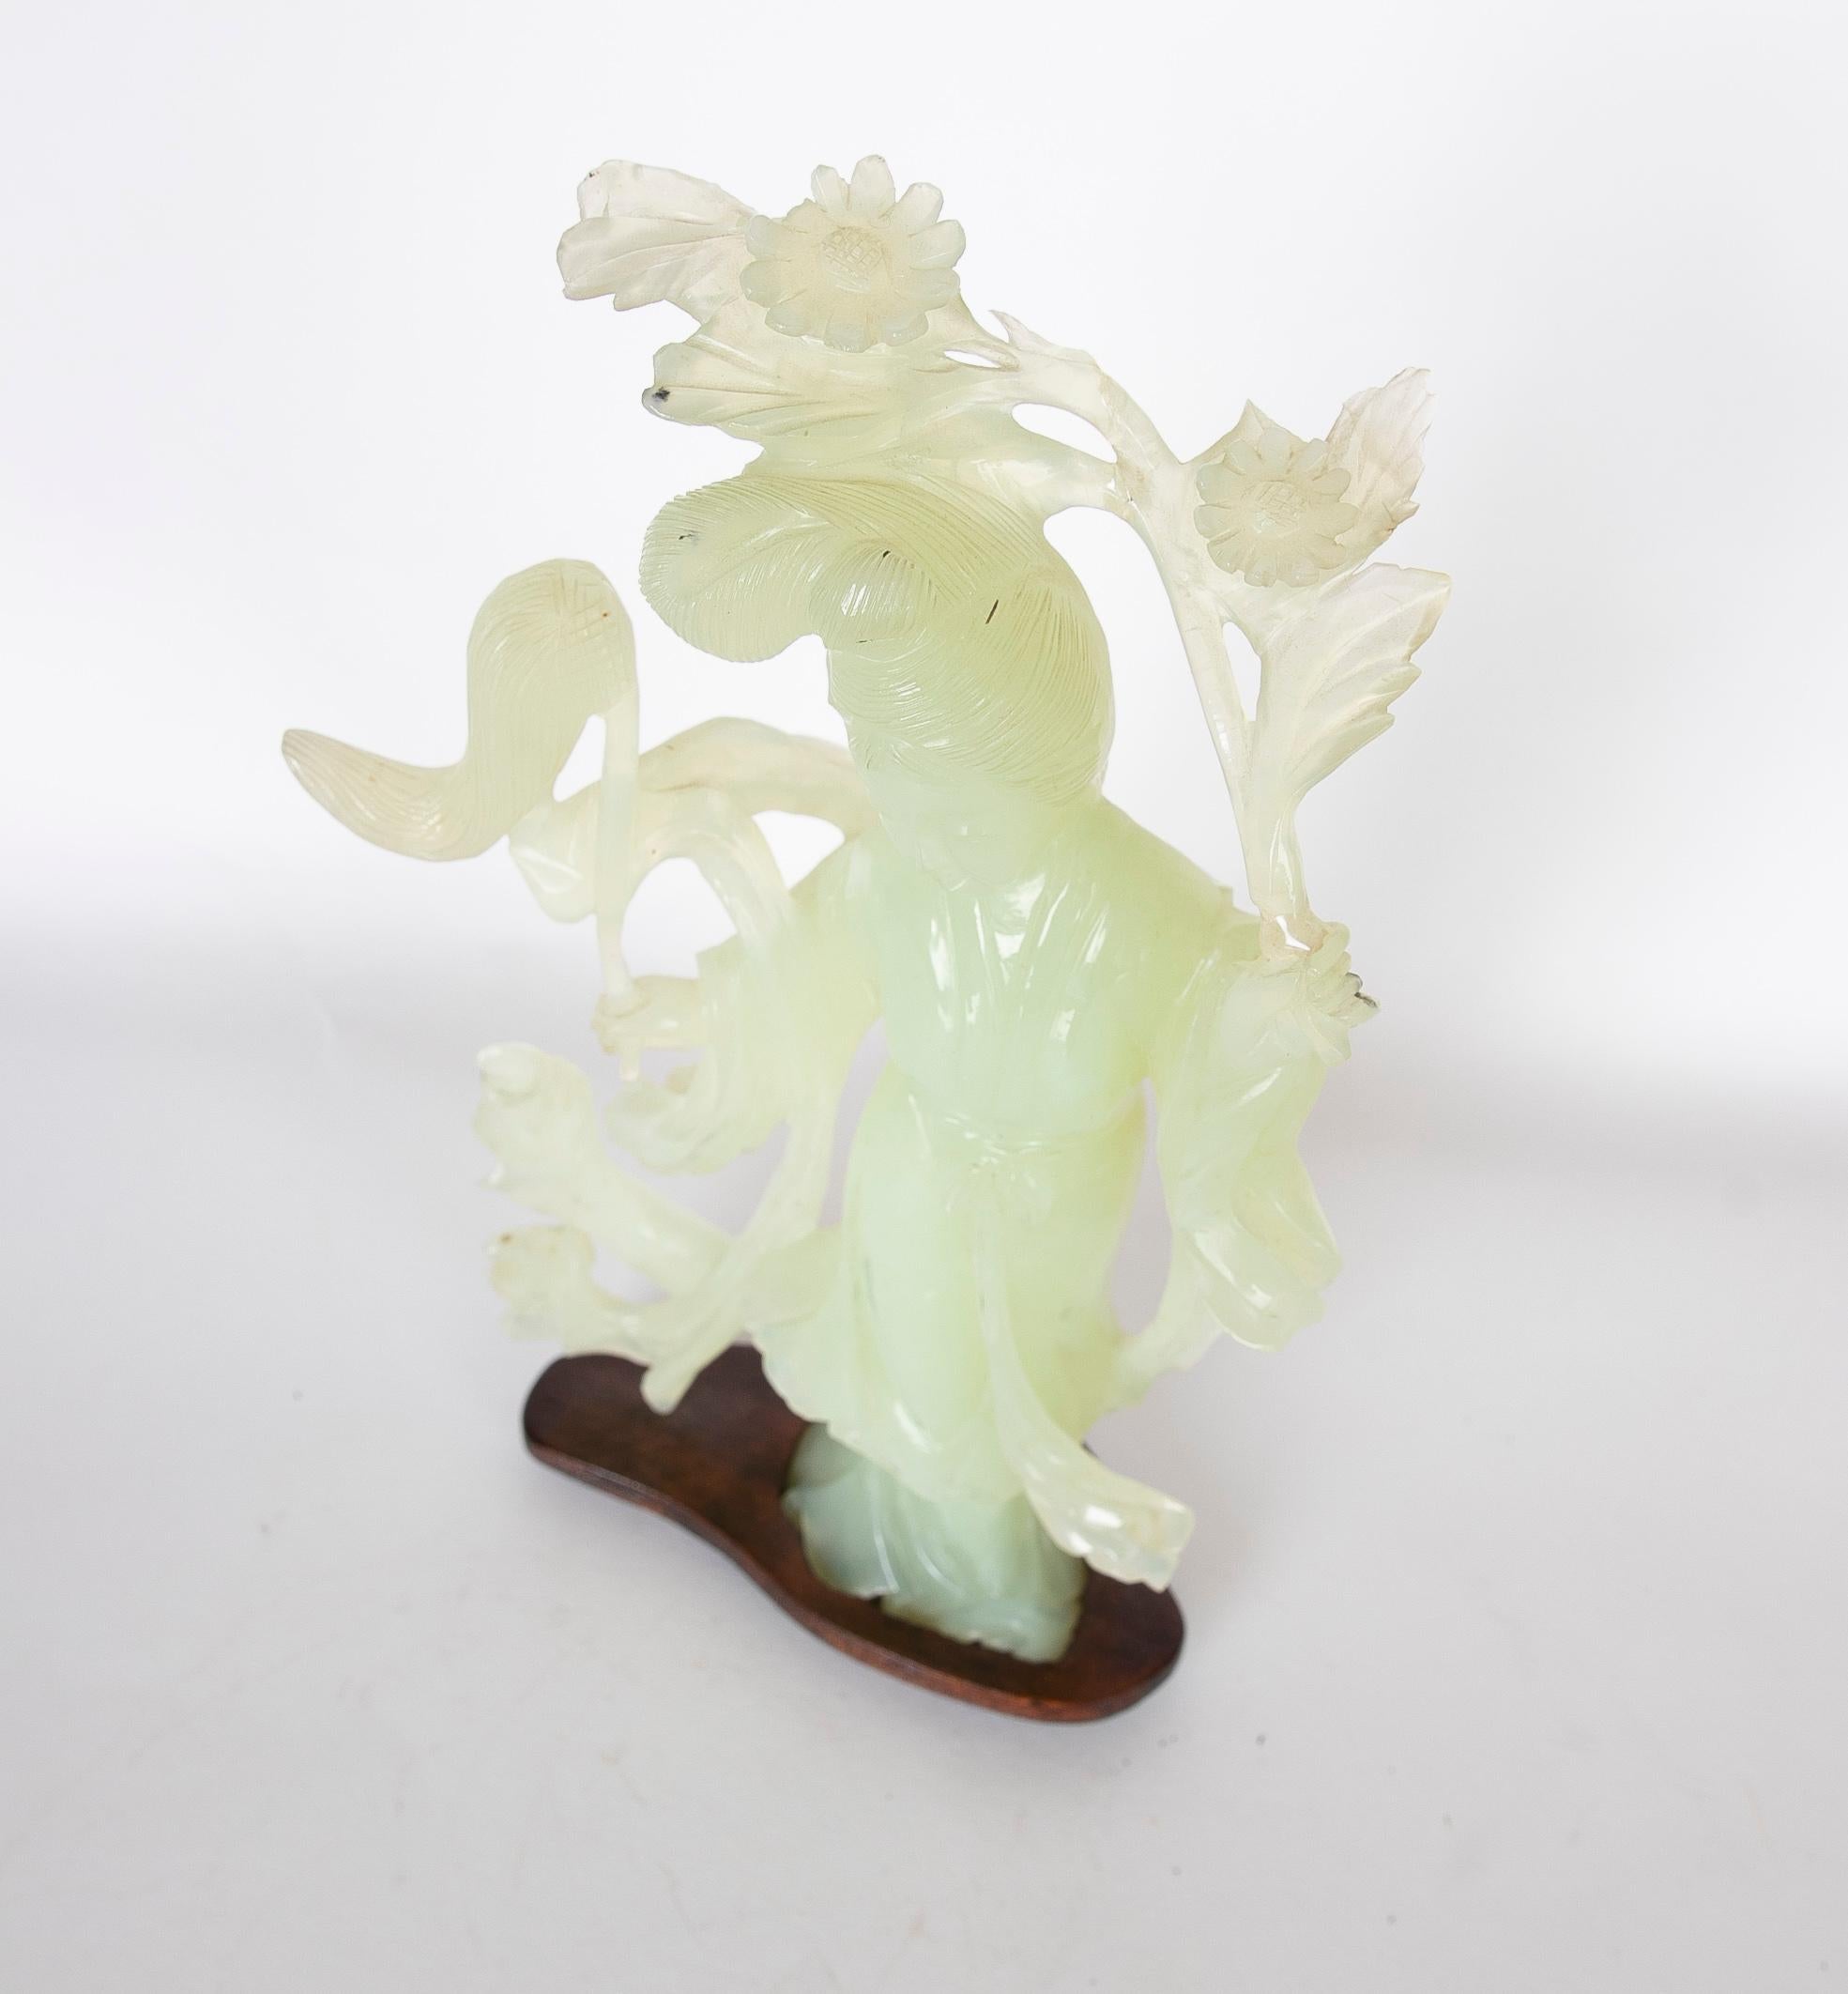 Hand-Carved Jadeite Figurine of an Oriental Woman on a Wooden Base For Sale 4